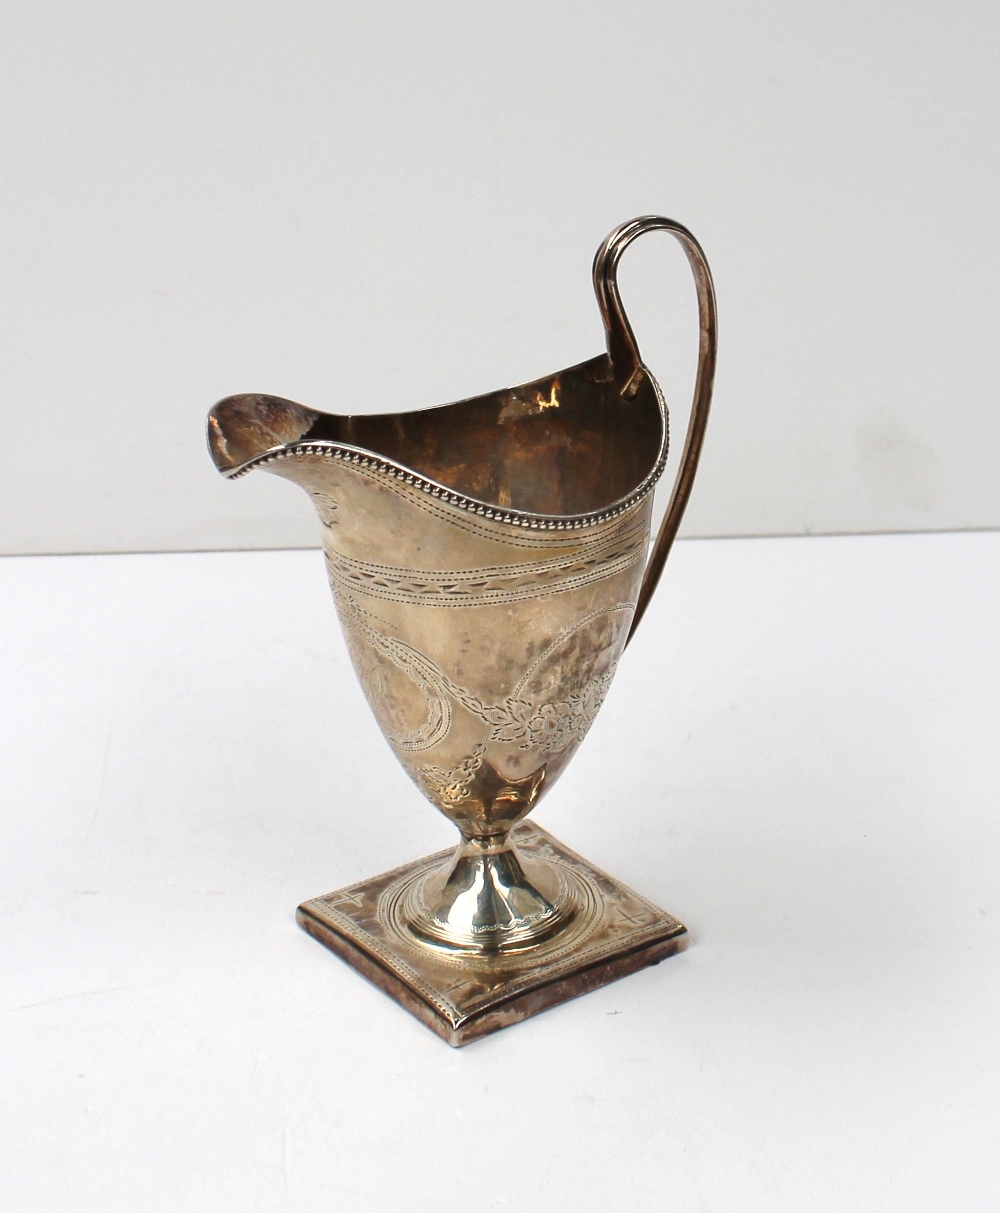 A George III silver helmet shaped cream jug with a beaded rim, the body decorated with swags of